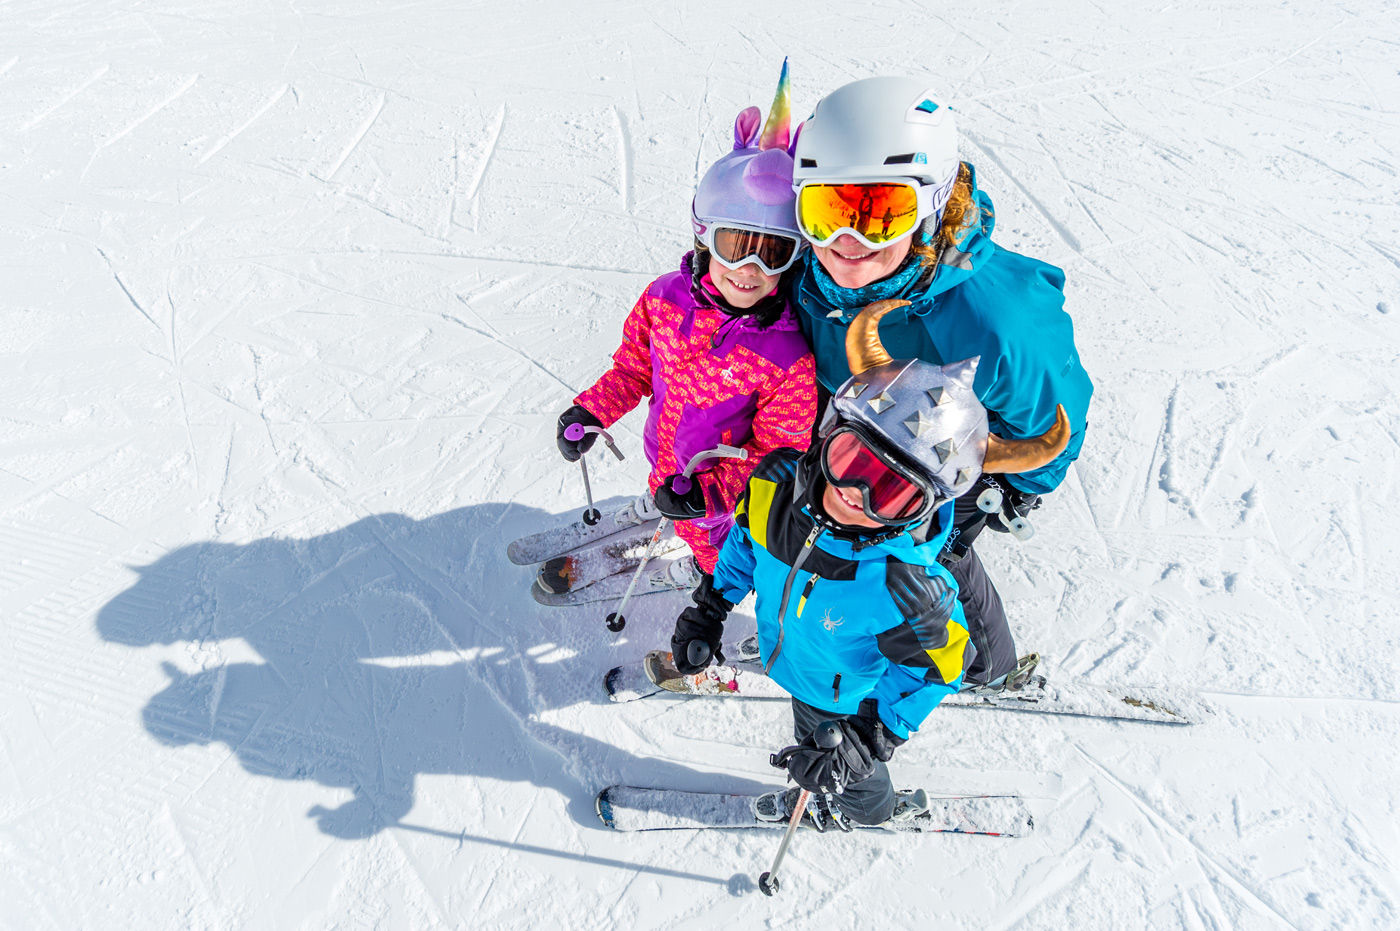 Enjoy one of the many winter activities at Big White Ski Resort when you Stay Ski and Play from the Comfort Suites hotel in Kelowna.